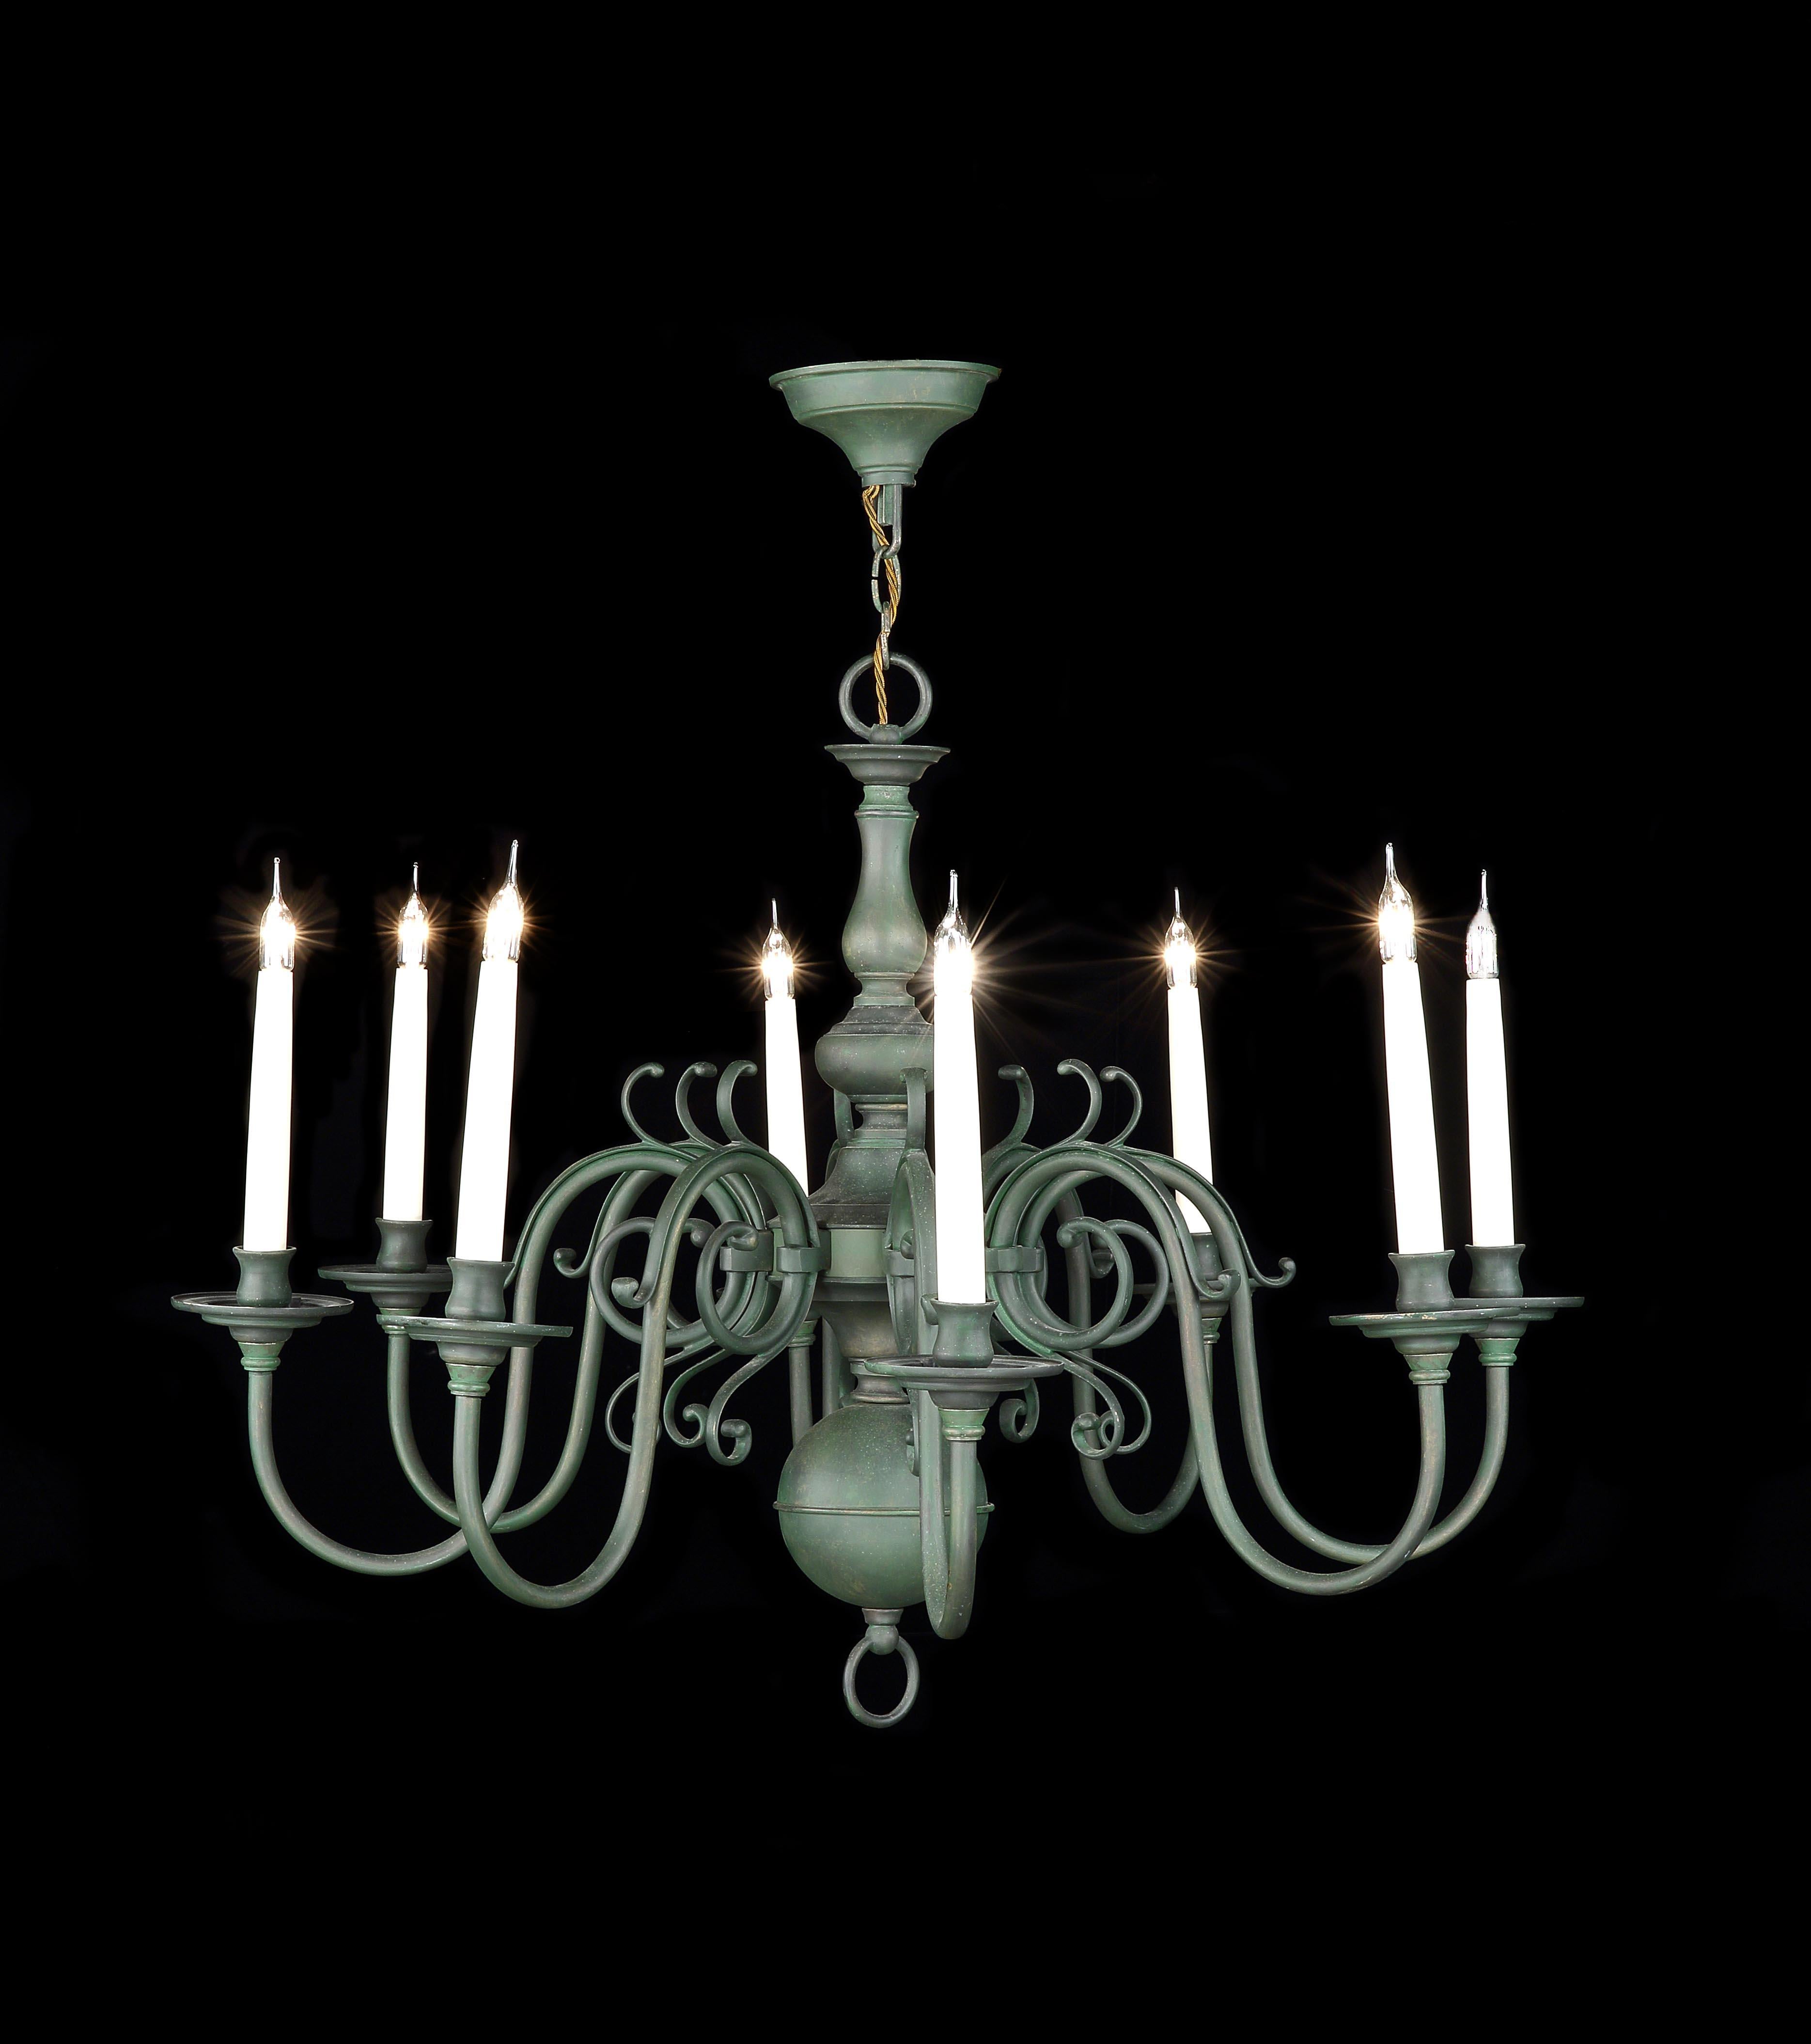 A 19th century green painted 8-arm Dutch brass chandelier electrified with French candles

- Unusually painted green which softens the aesthetic
- Recently electrified with French candles
- Unusually retaining original ceiling plate

Original